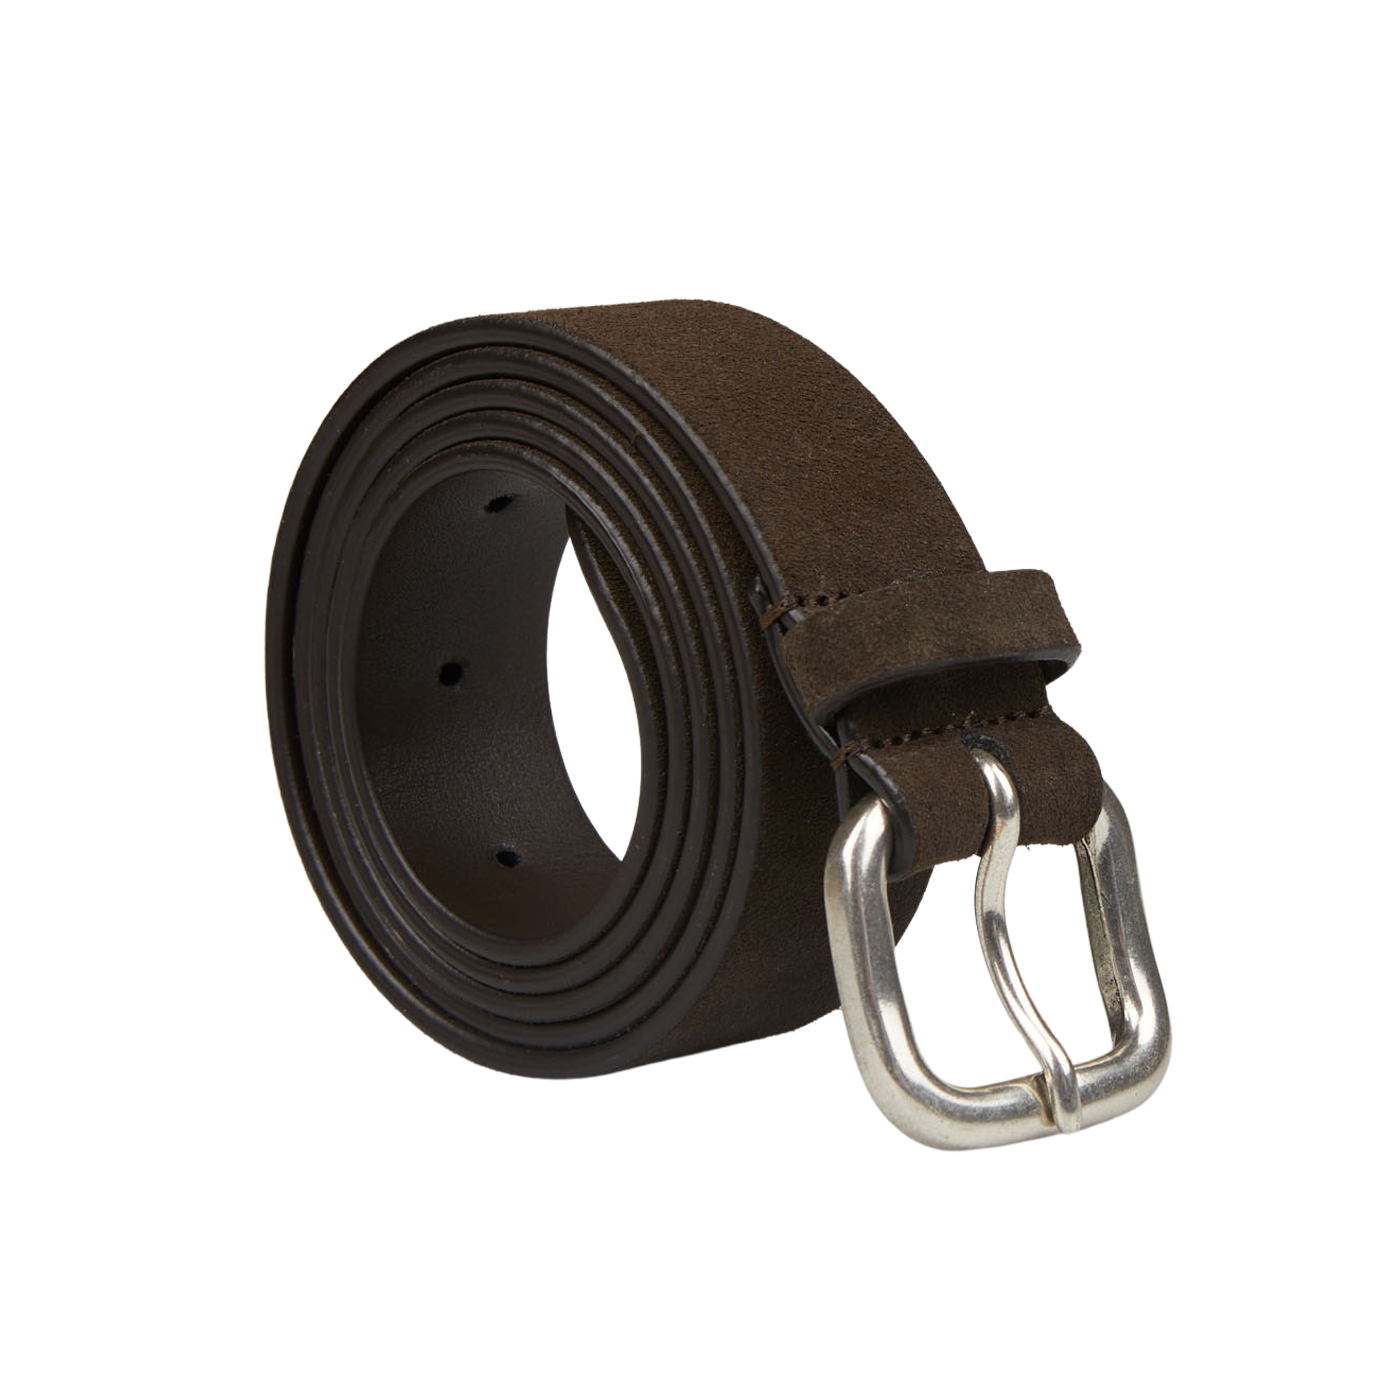 A Dark Brown Suede Leather 30mm Belt by Anderson's on a white background.